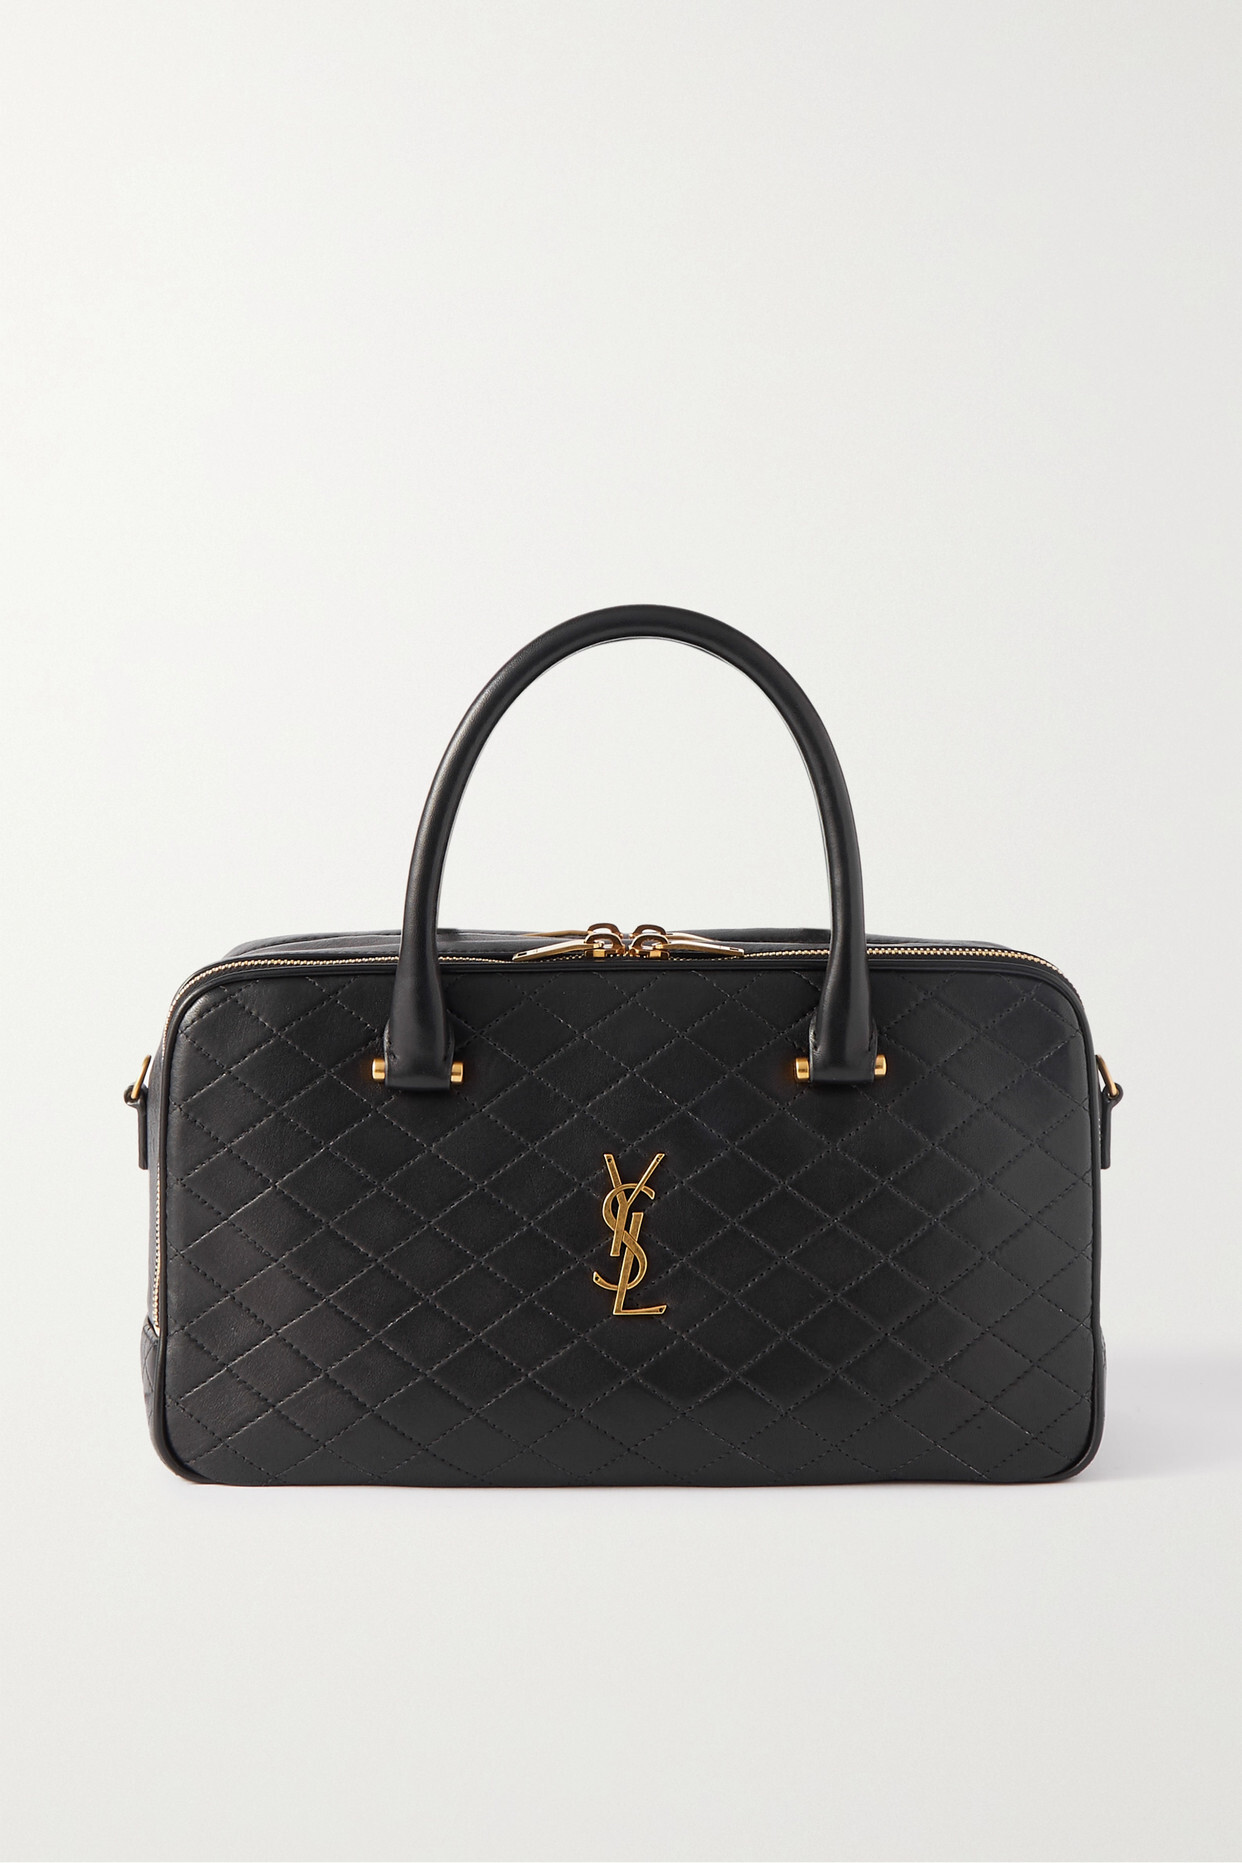 SAINT LAURENT - Lyia Quilted Leather Tote - Black